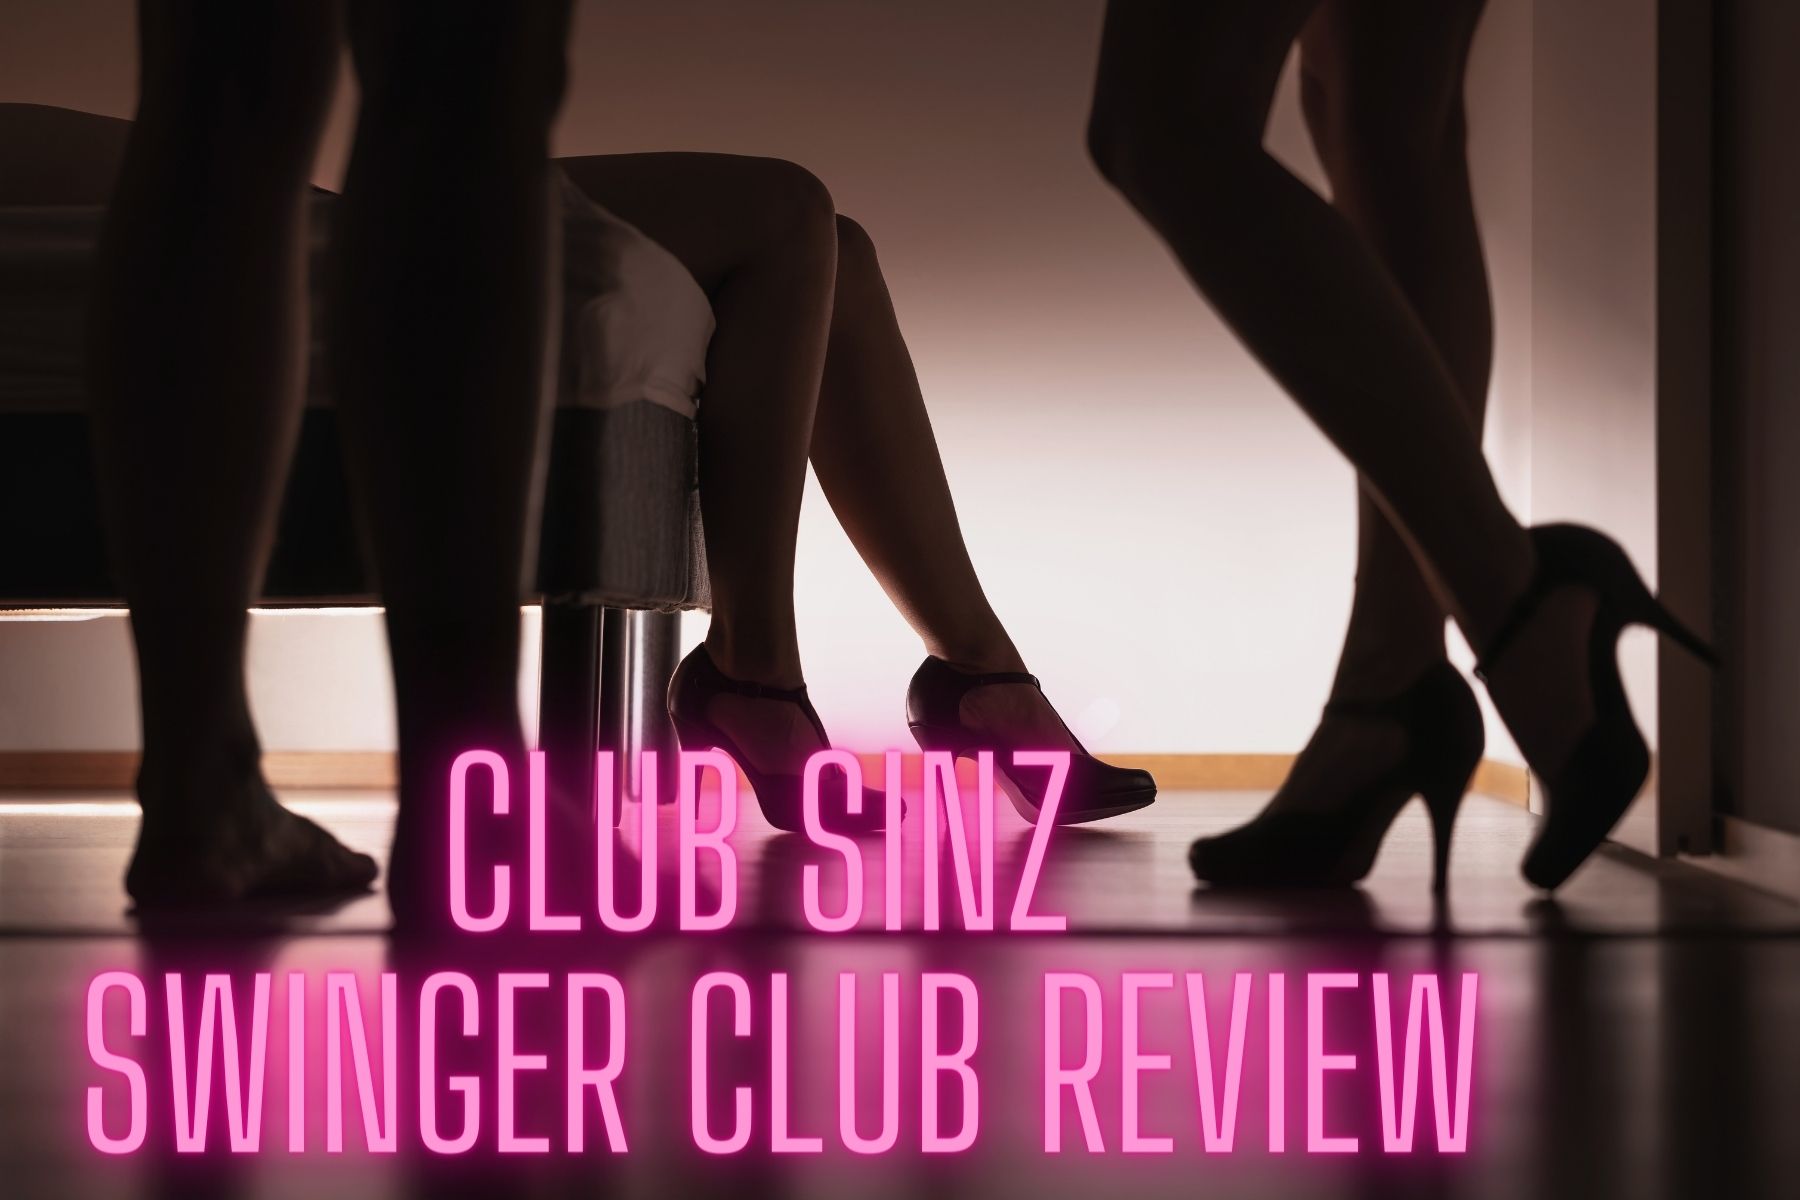 reviews swinger lifestyle clubs and resorts